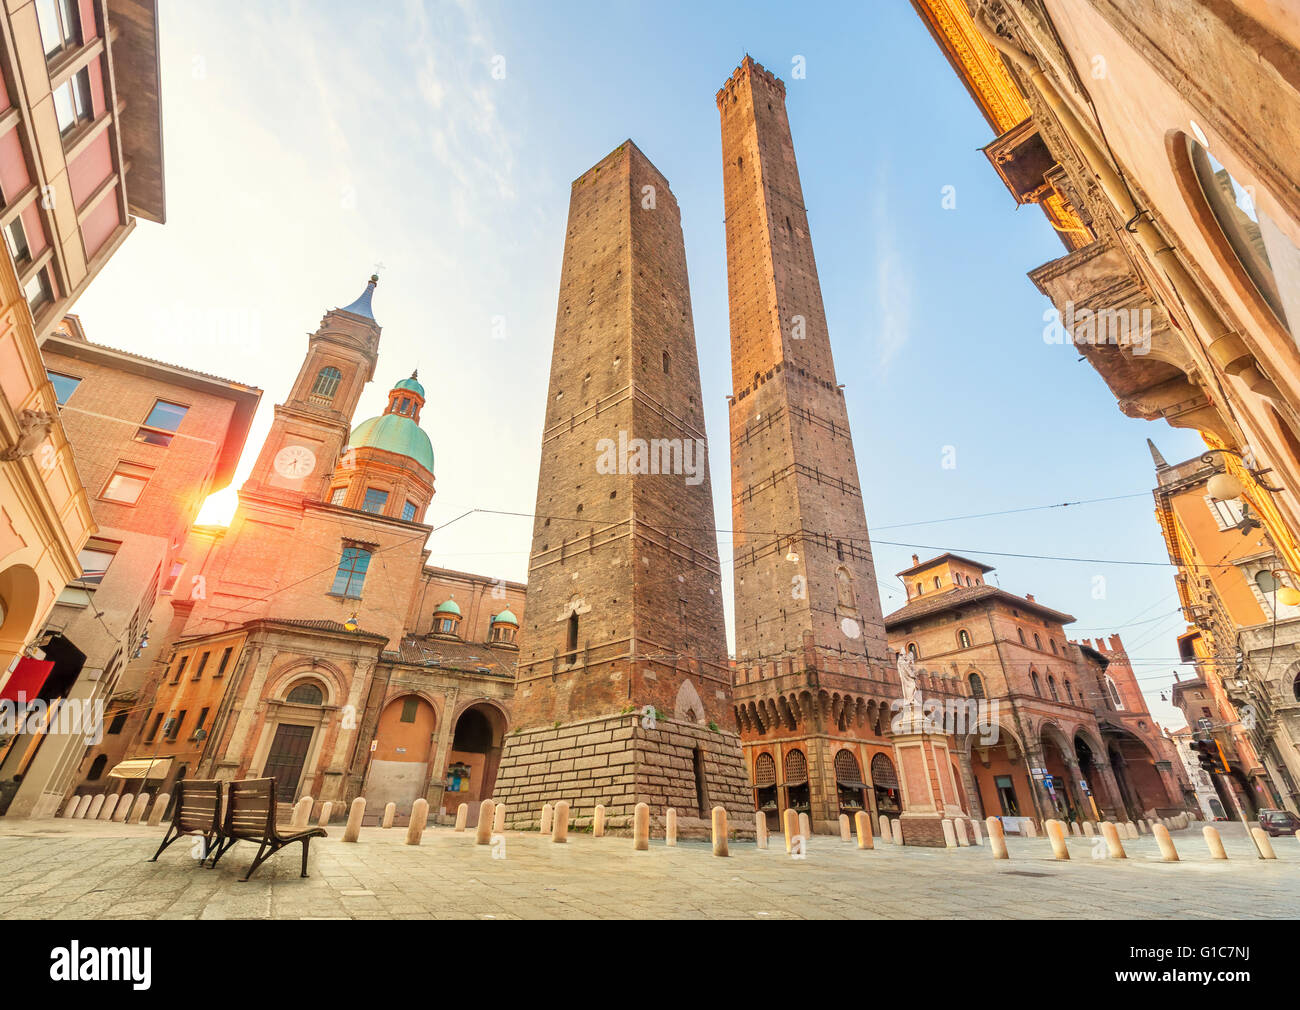 Two famous falling towers Asinelli and Garisenda in the morning, Bologna, Emilia-Romagna, Italy Stock Photo